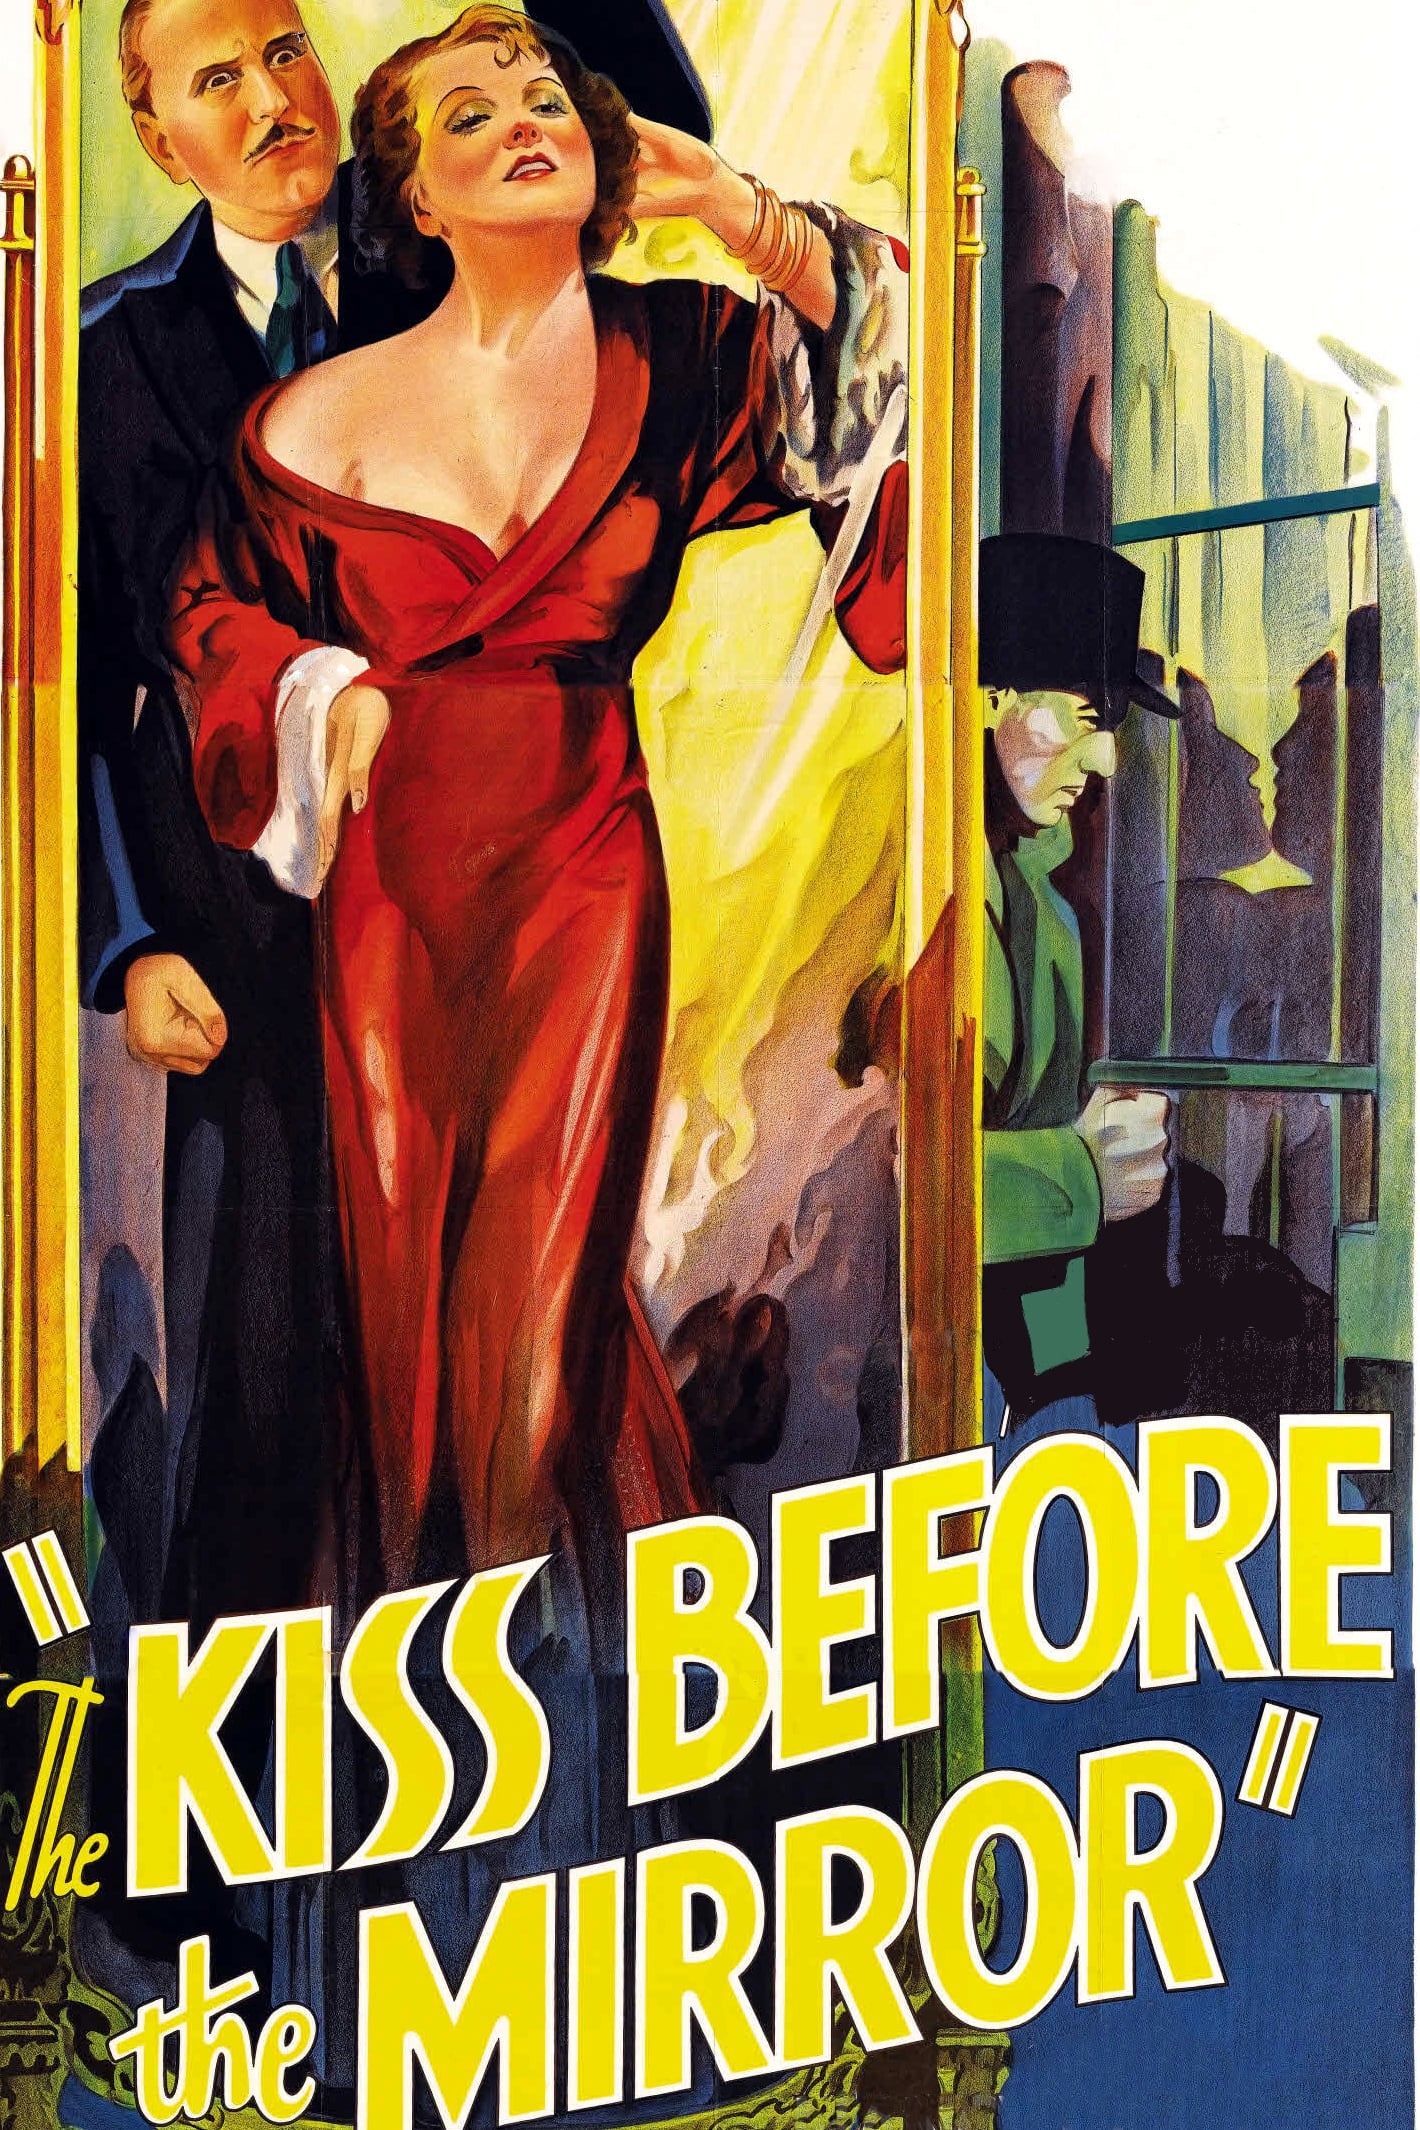 The Kiss before the Mirror (1933)